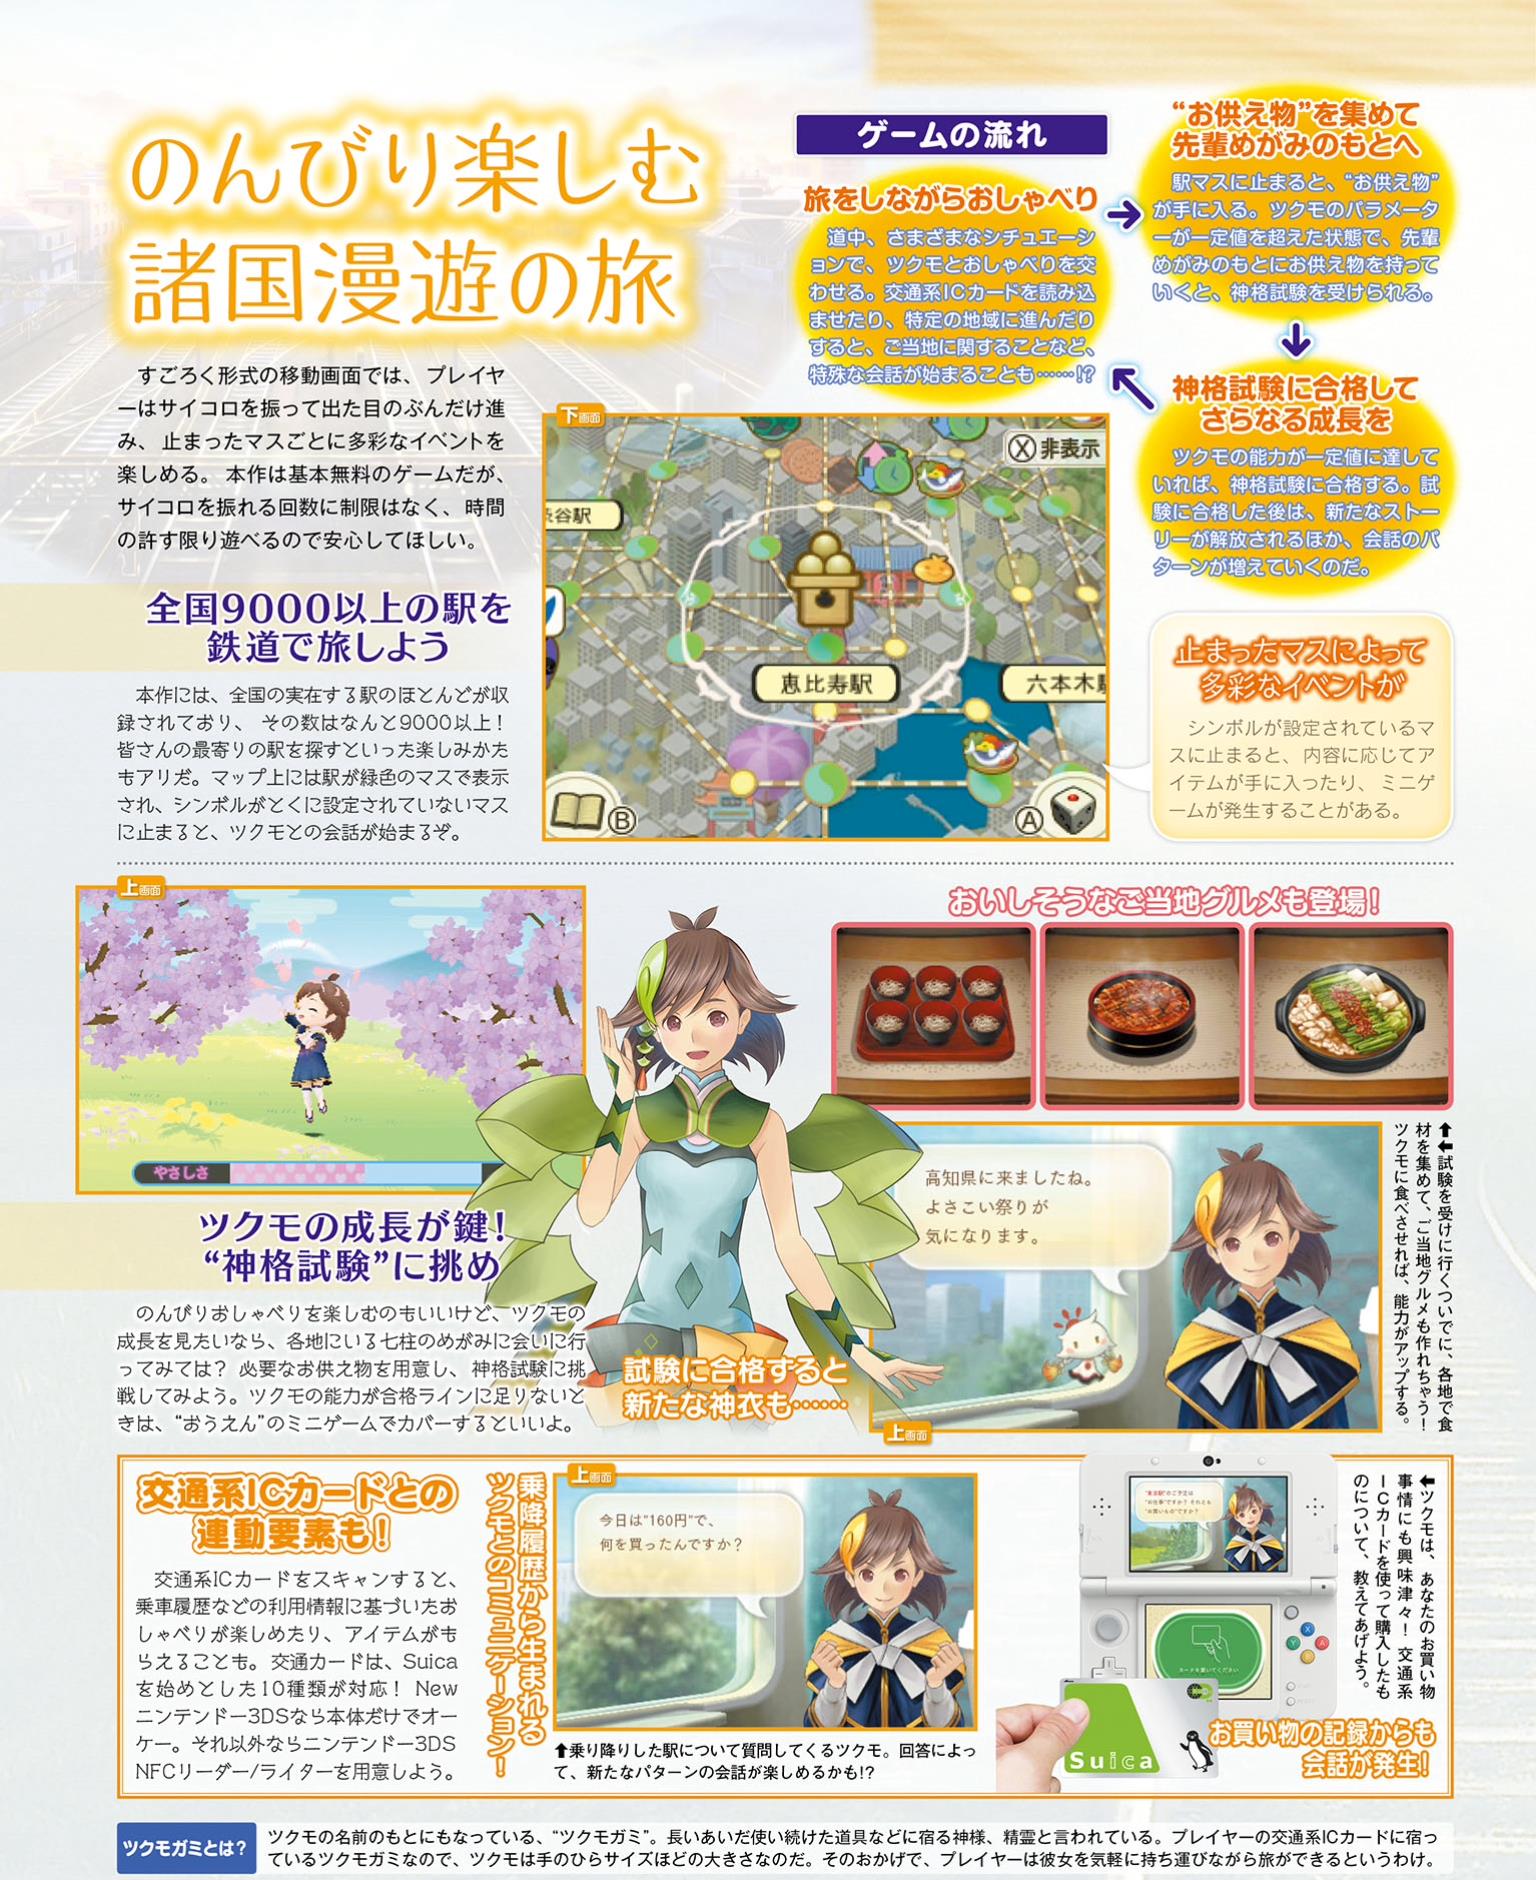 Scans Roundup Digimon Universe Appli Monsters Super Mario Maker For 3ds More Nintendo Everything